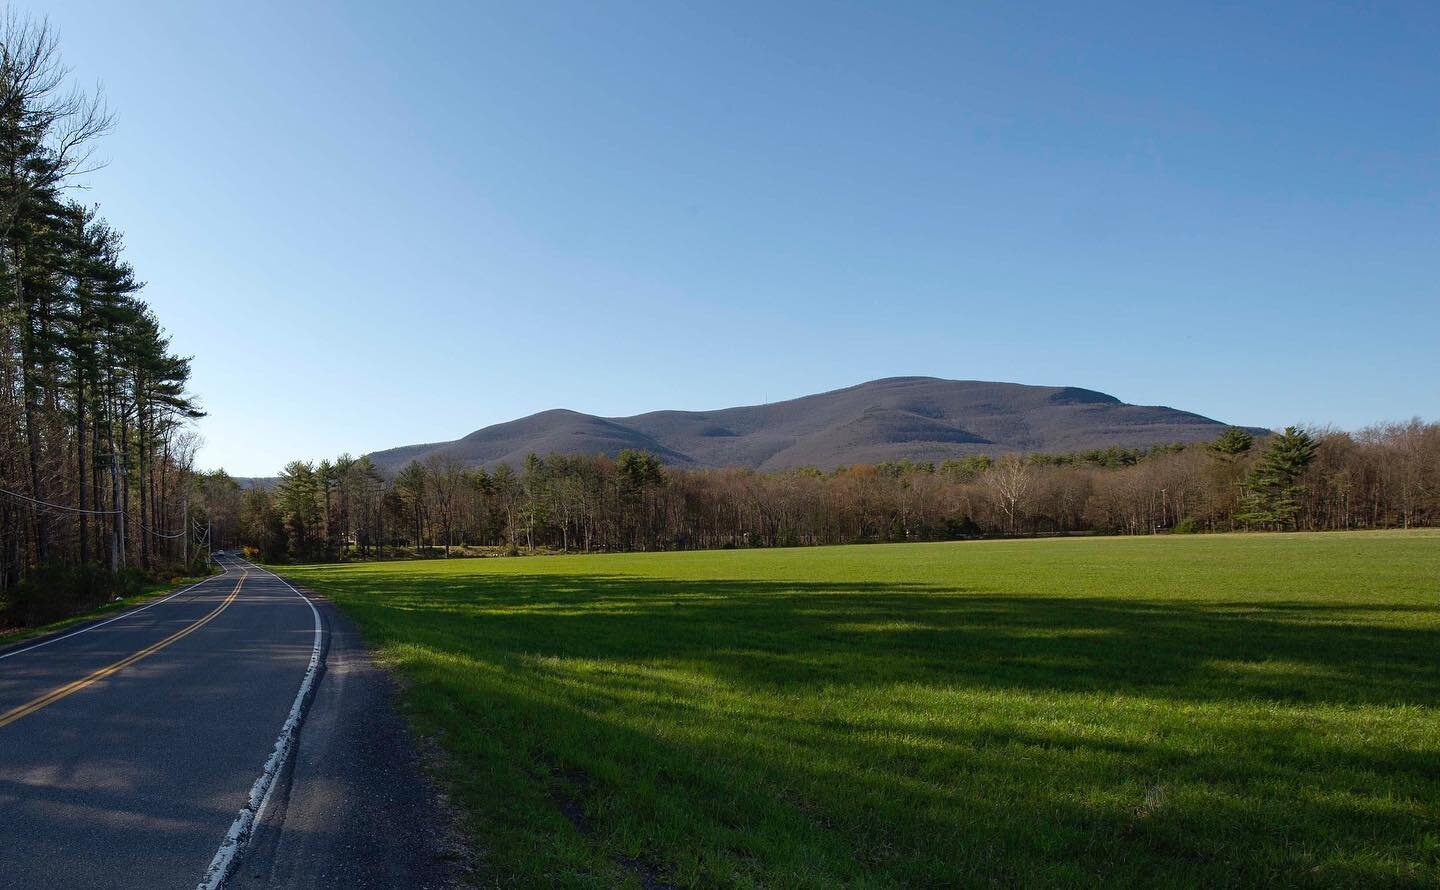 Ready to welcome you to the Catskills for the Women&rsquo;s Woodstock Cycling Grand Prix, tomorrow May 1. Tour of Britain Race Director Mick Bennett said:  I have nothing but admiration for every thing that Martin and his 'like minded' colleagues are